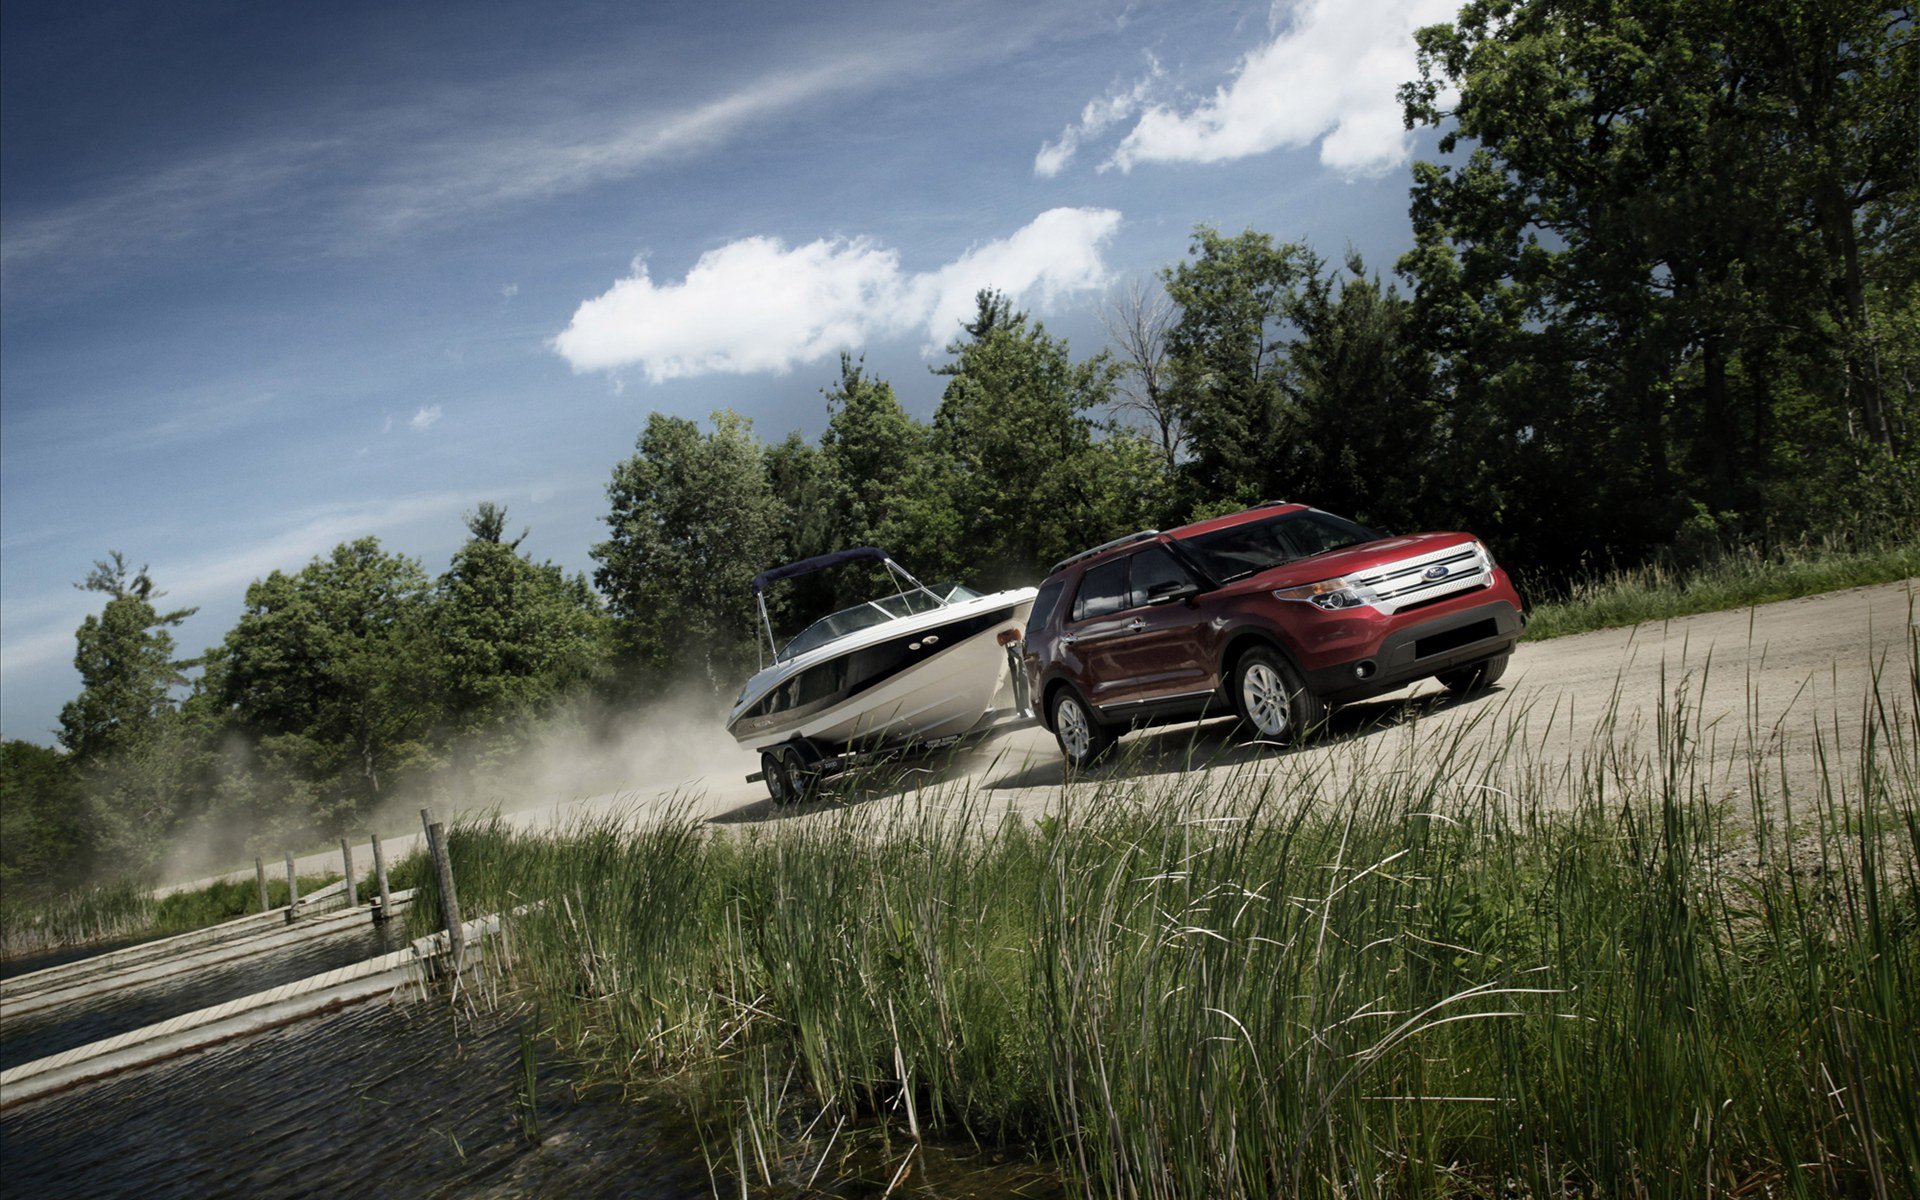 Vehicles Ford Explorer HD Wallpaper | Background Image